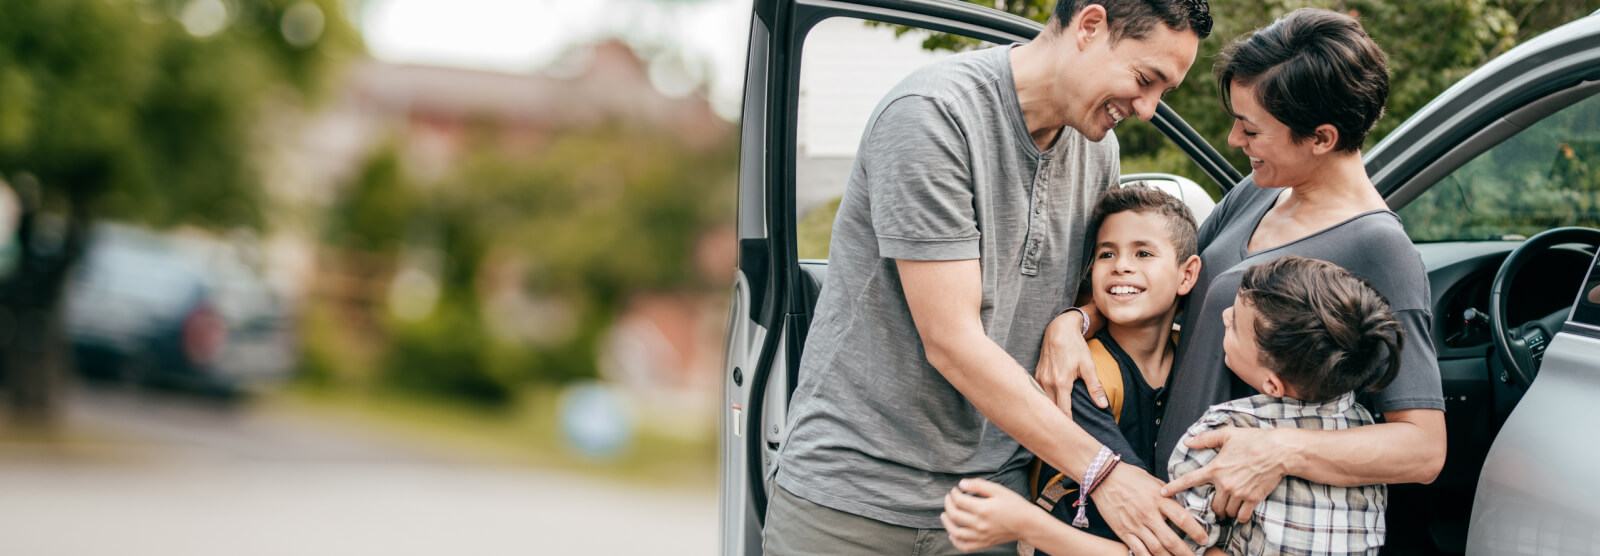 A young family embracing next to a car